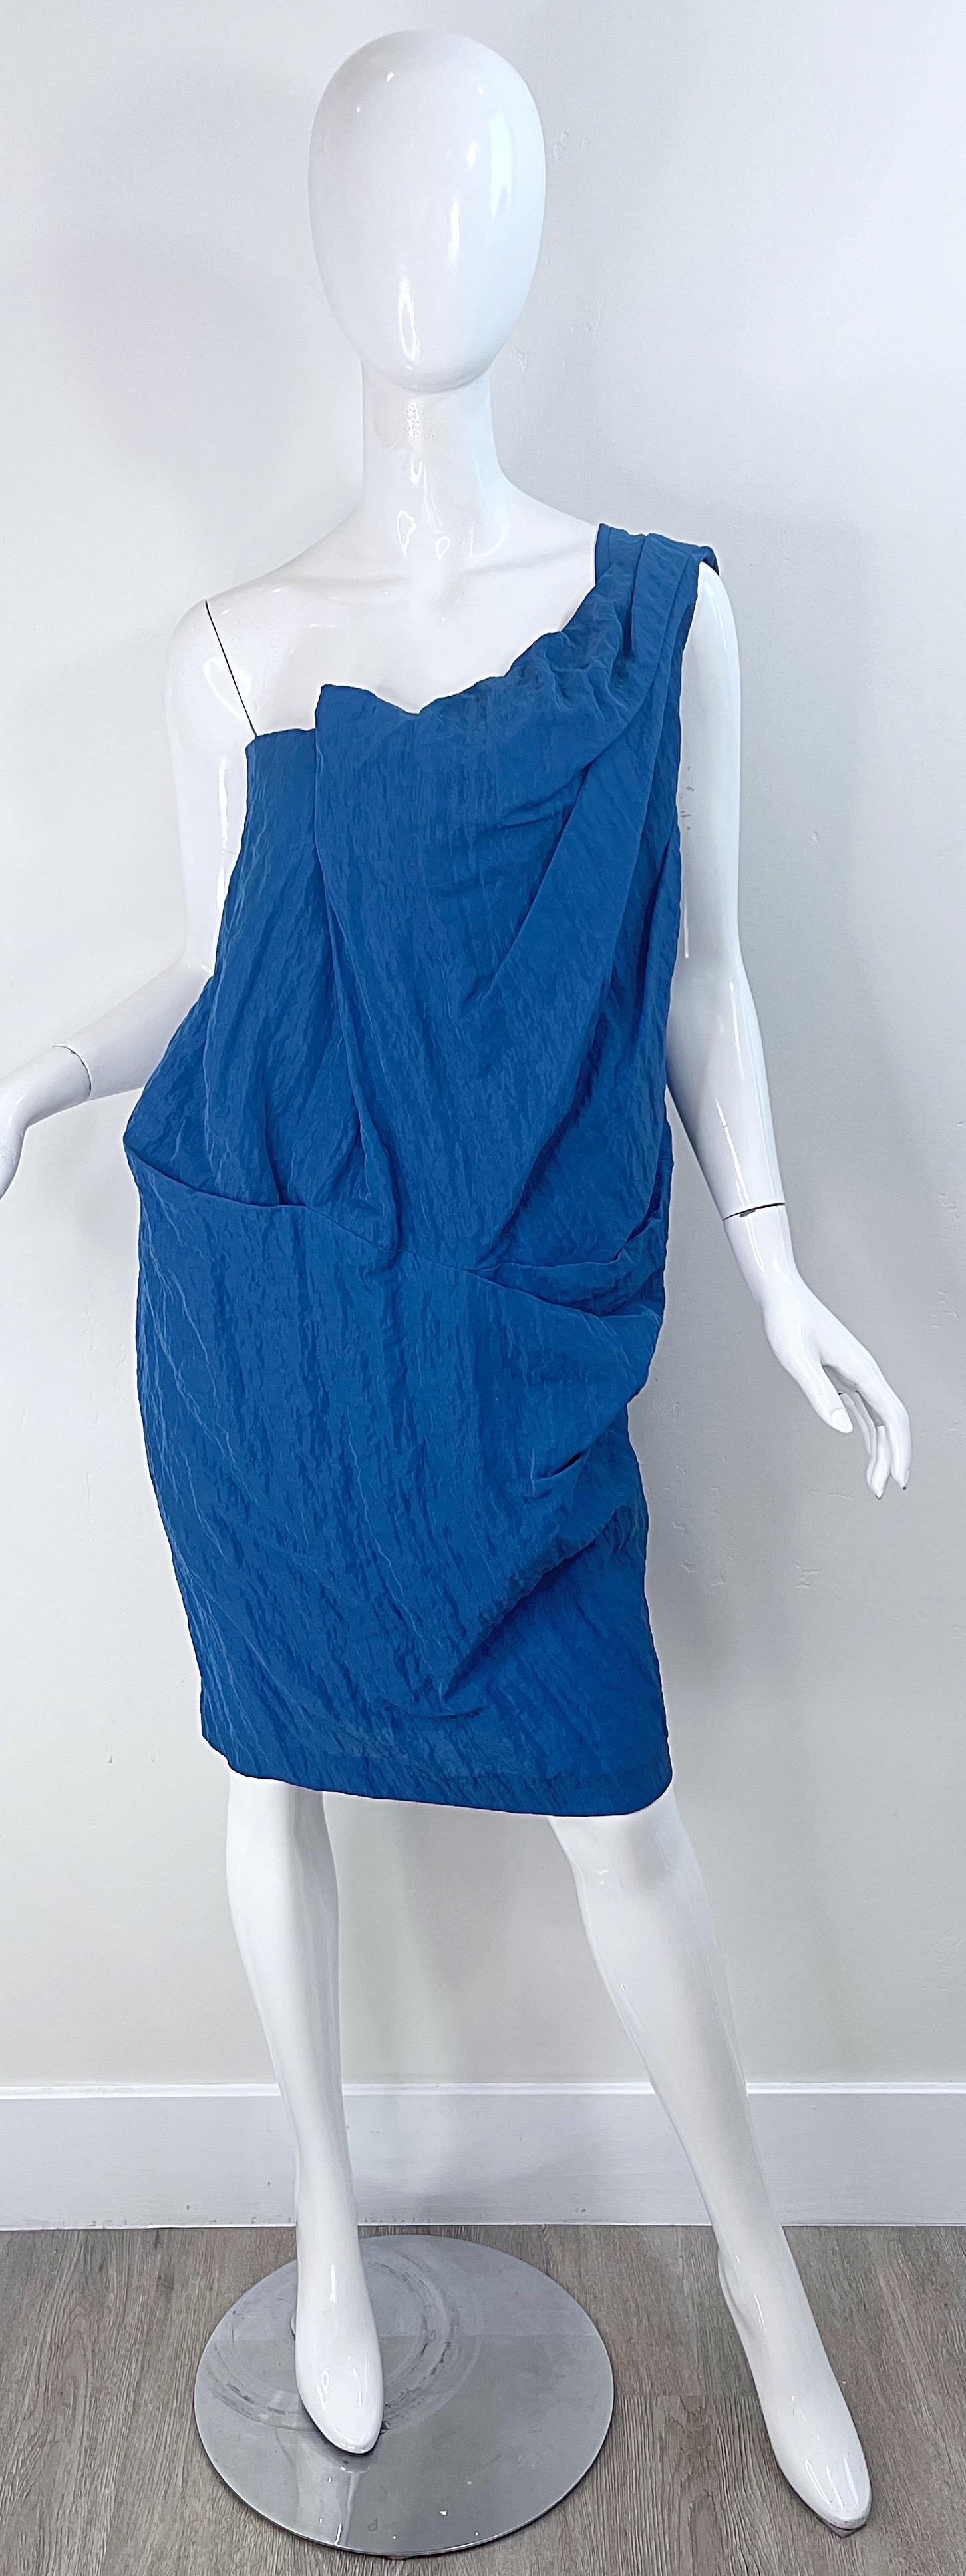 Women's NWT Ports 1961 Runway Spring 2011 Size 10 Blue One Shoulder Grecian Dress For Sale